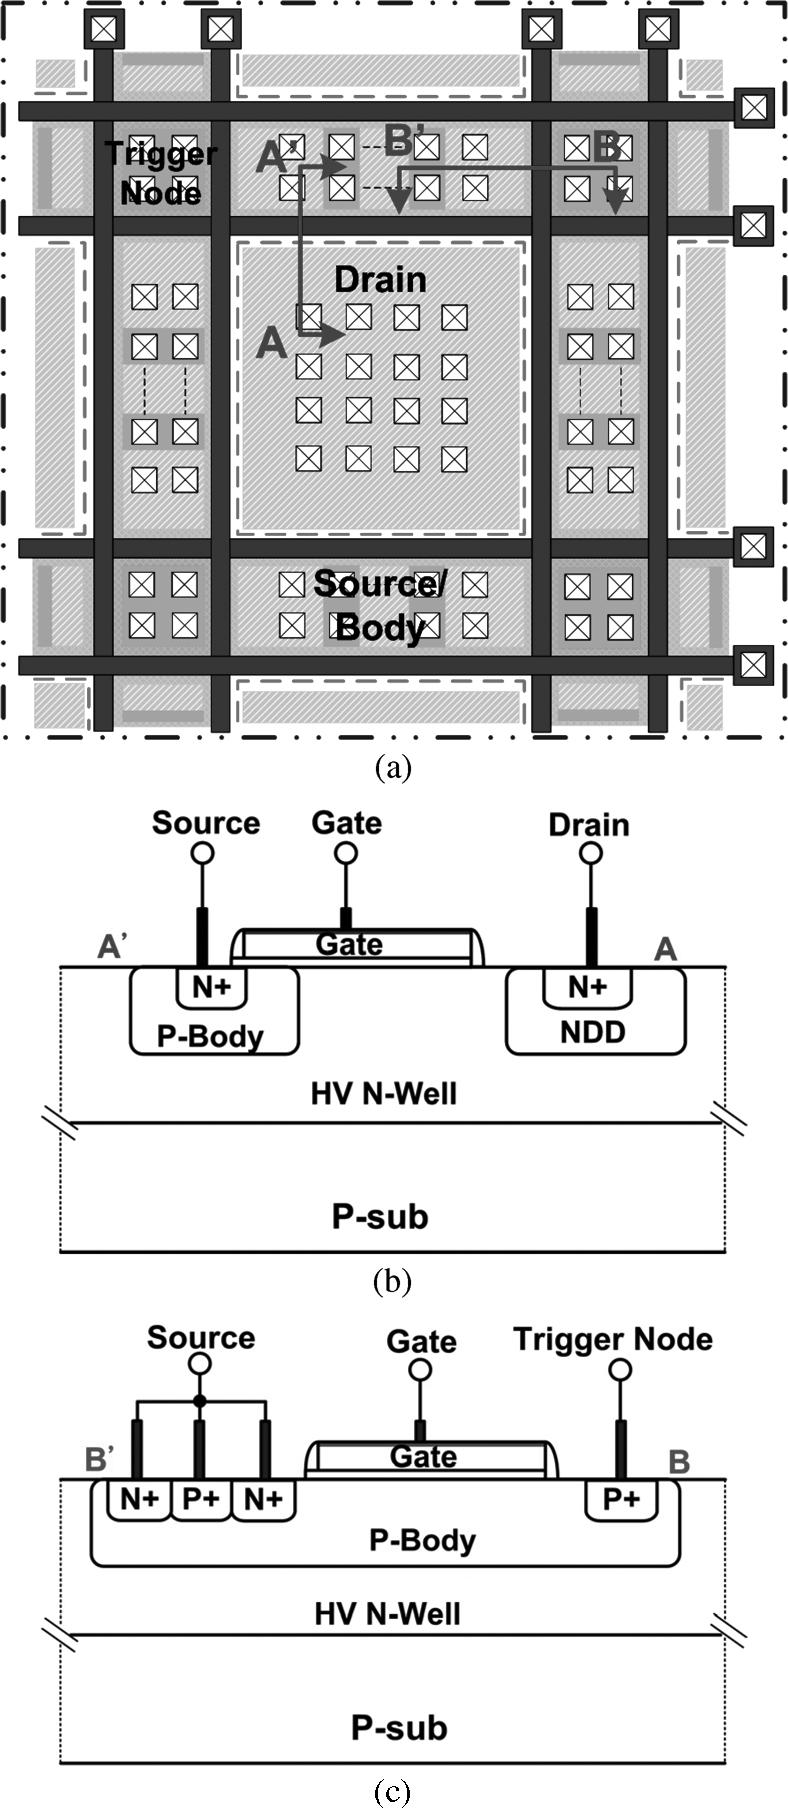 1042 IEEE TRANSACTIONS ON CIRCUITS AND SYSTEMS I: REGULAR PAPERS, VOL. 57, NO. 5, MAY 2010 Fig. 6.